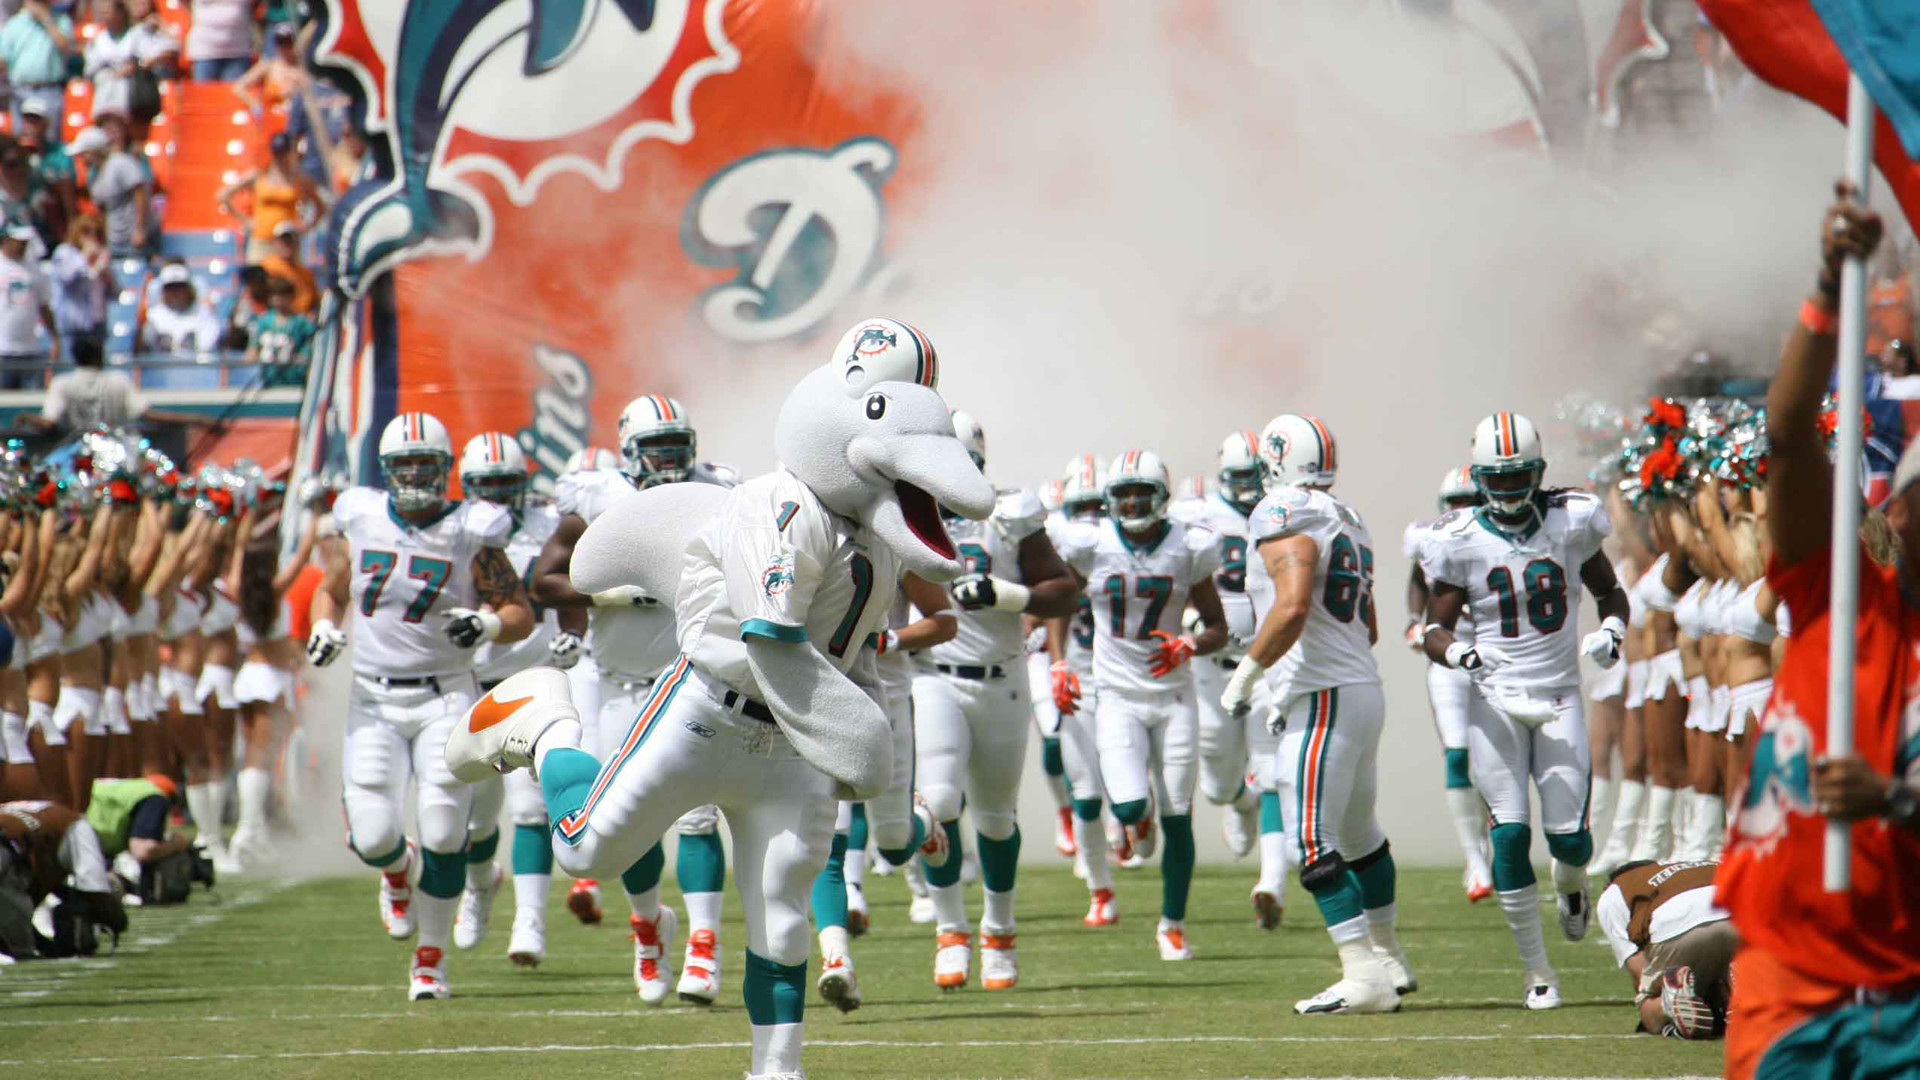 1920x1080 Tags: Miami Dolphins ...